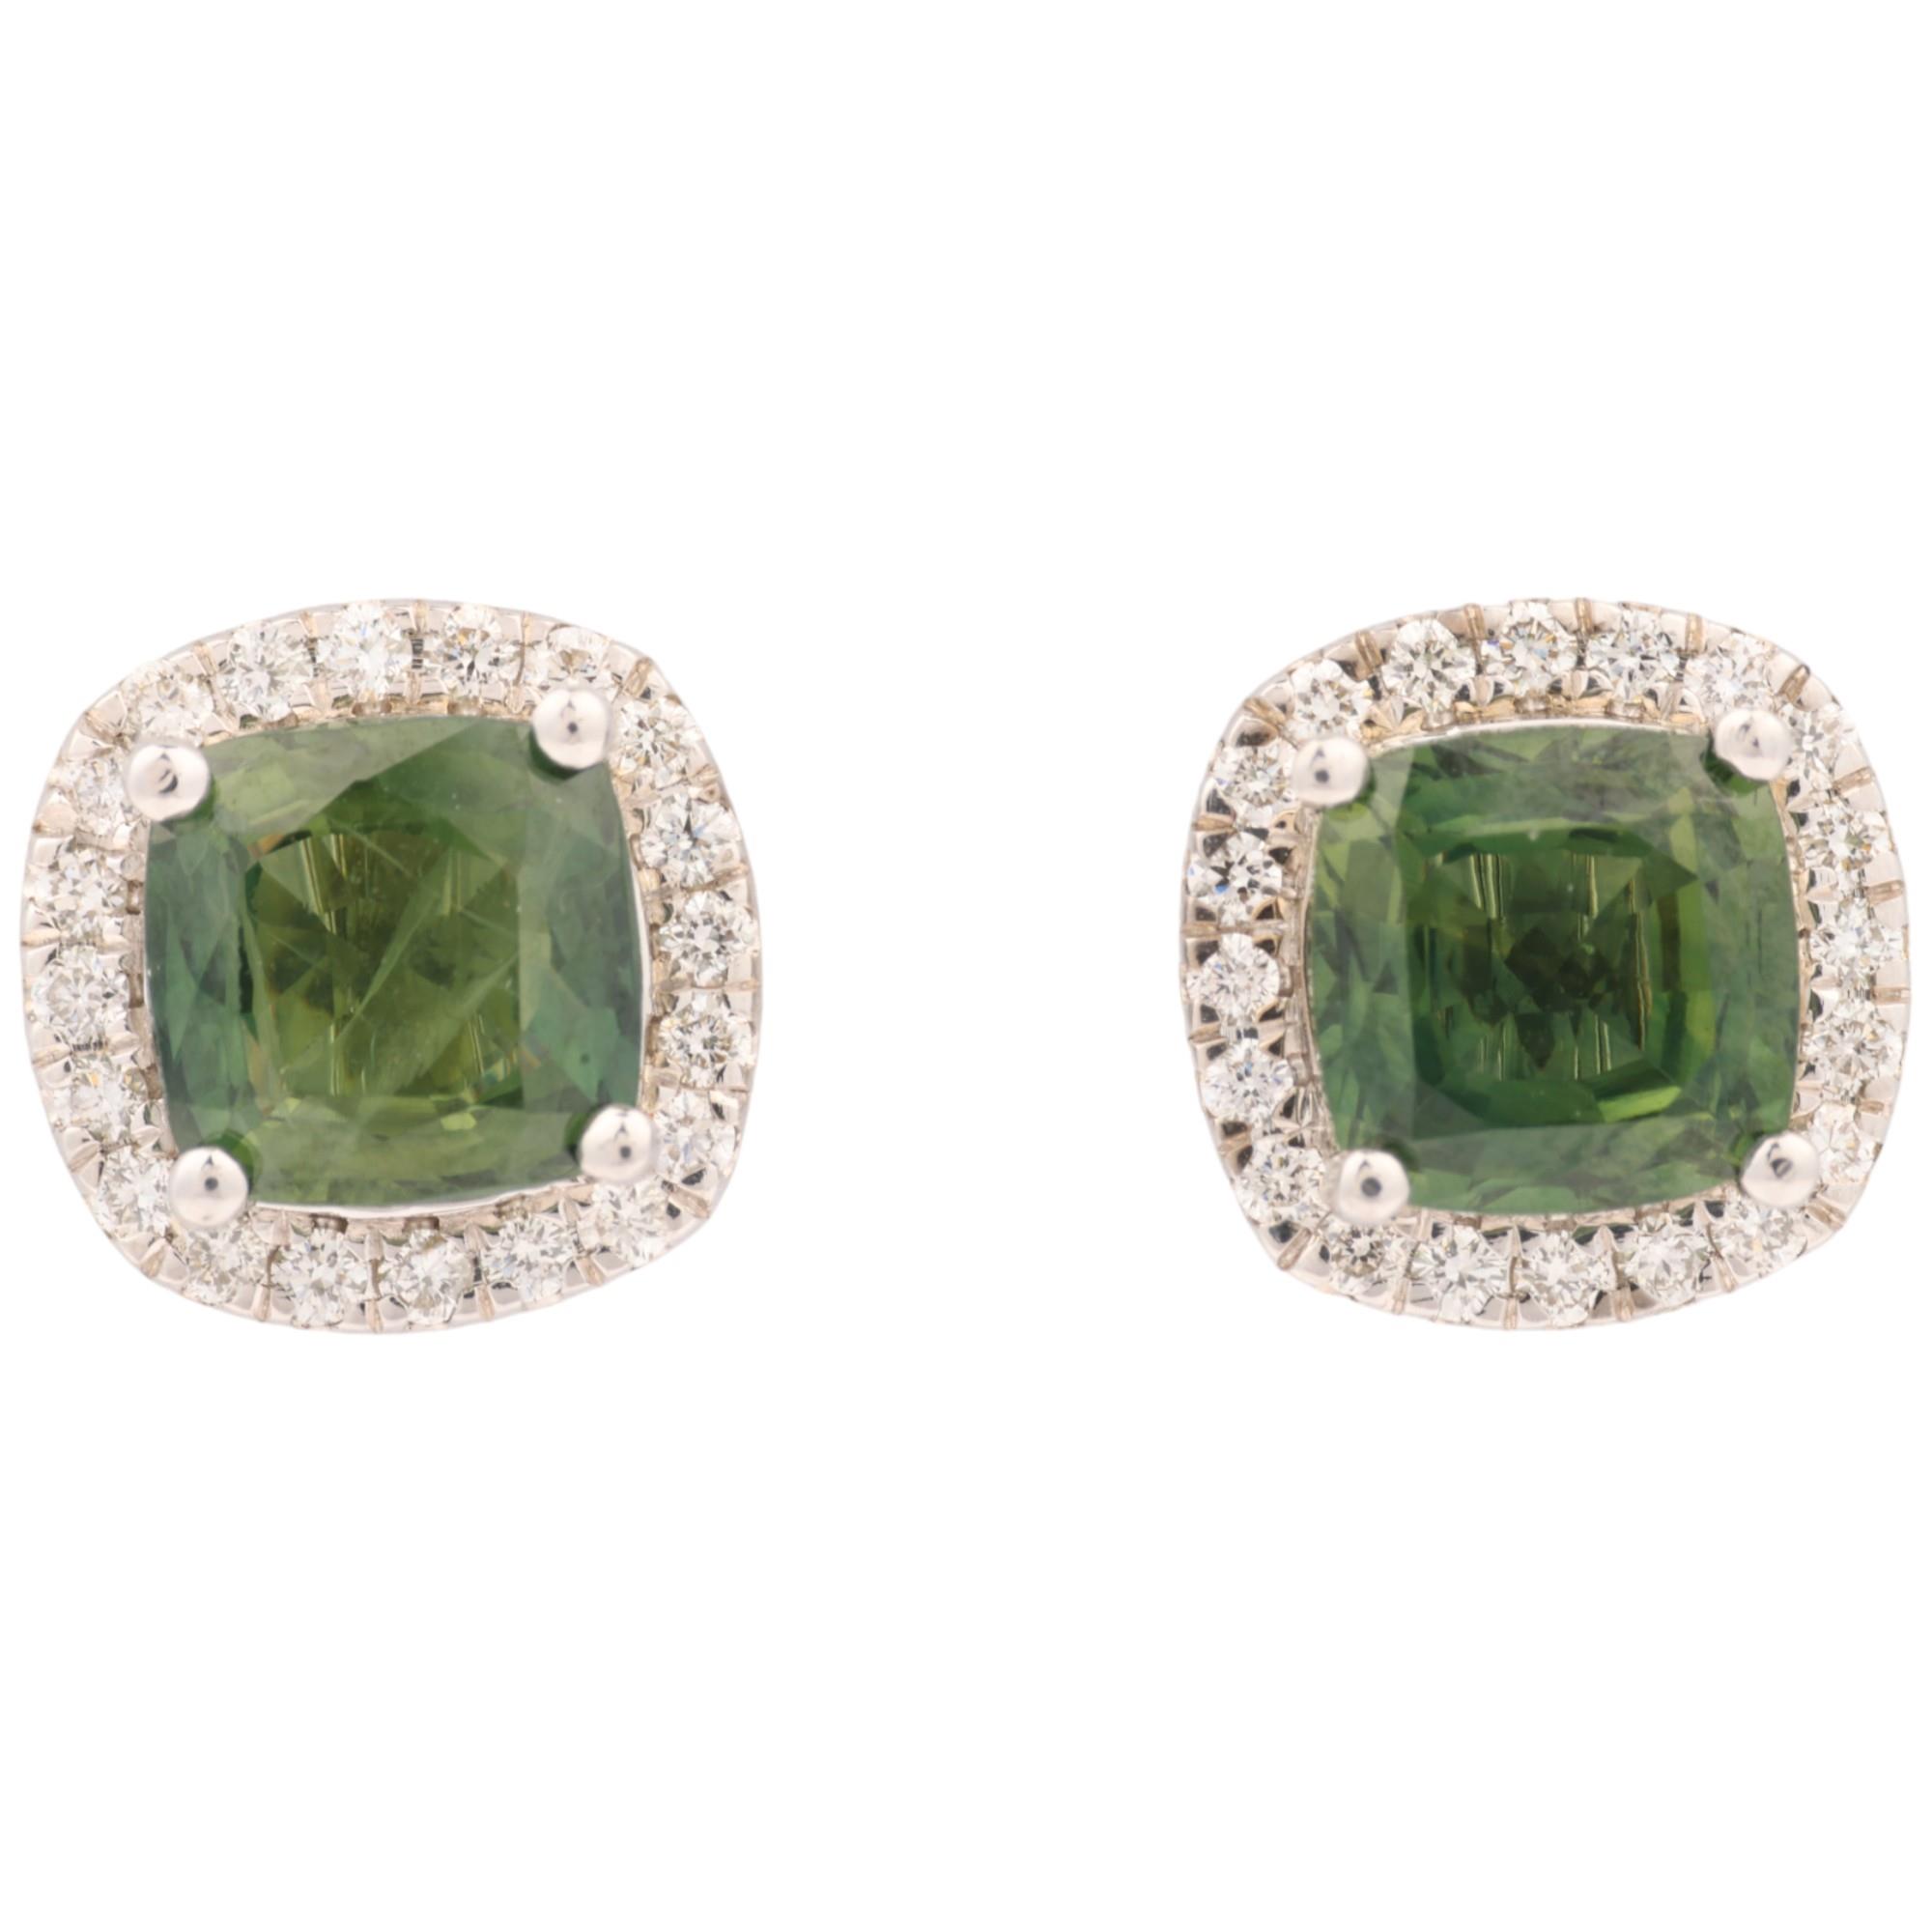 A pair of 9ct white gold demantoid garnet and diamond square cluster earrings, set with modern round